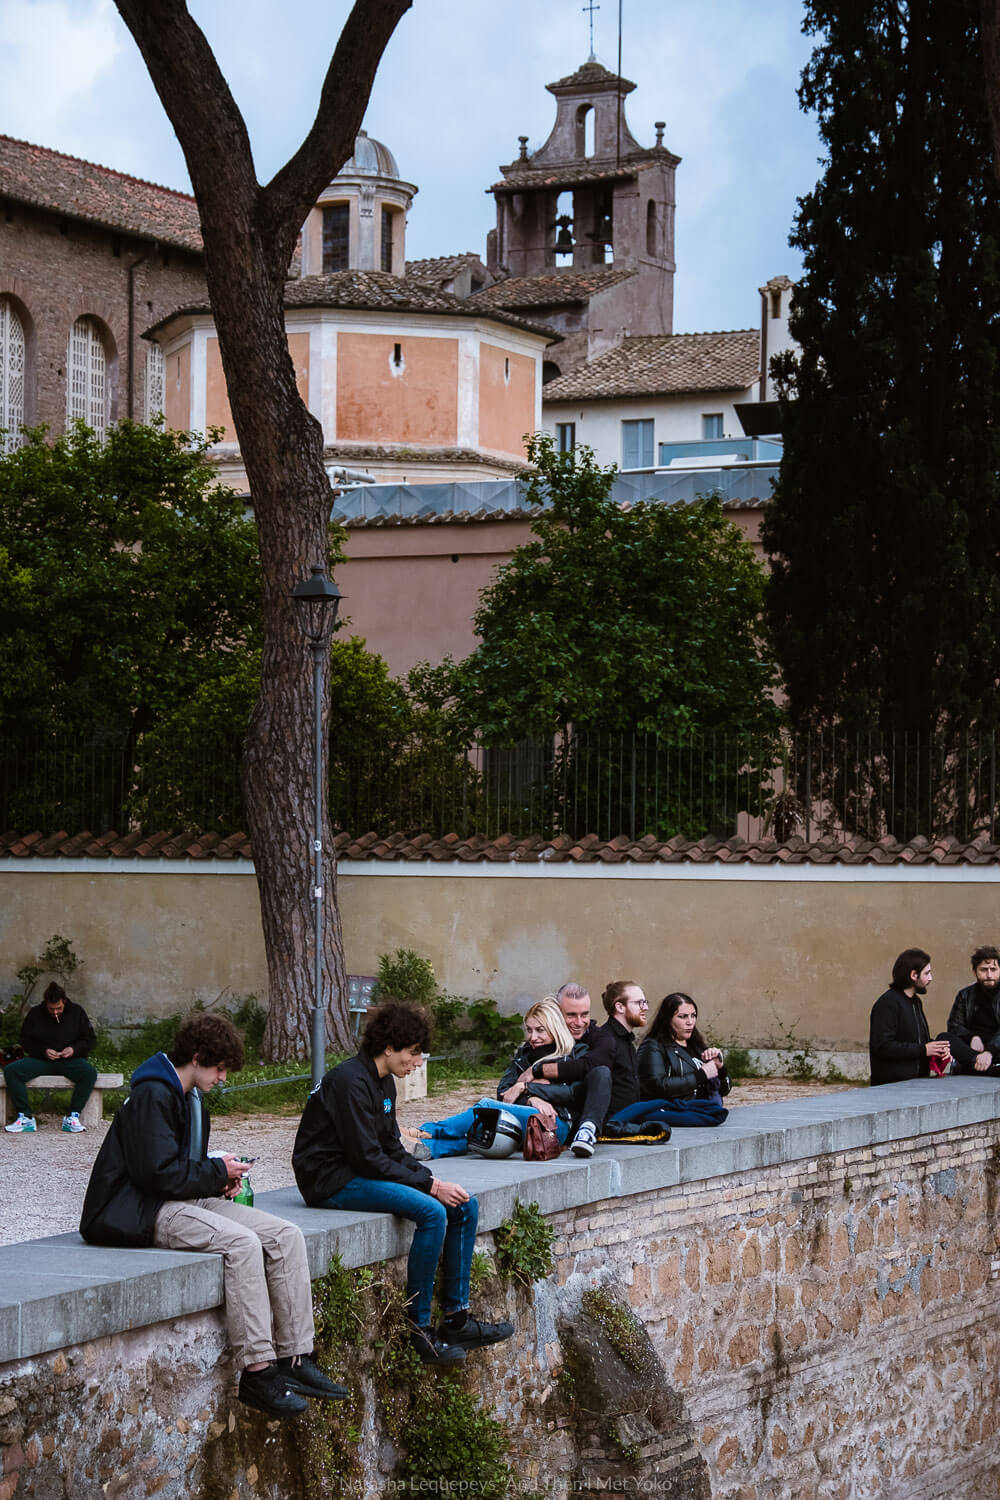 Locals enjoying the view in the Orange garden. Travel photography and guide by © Natasha Lequepeys for "And Then I Met Yoko". #rome #italy #travelblog #travelphotography